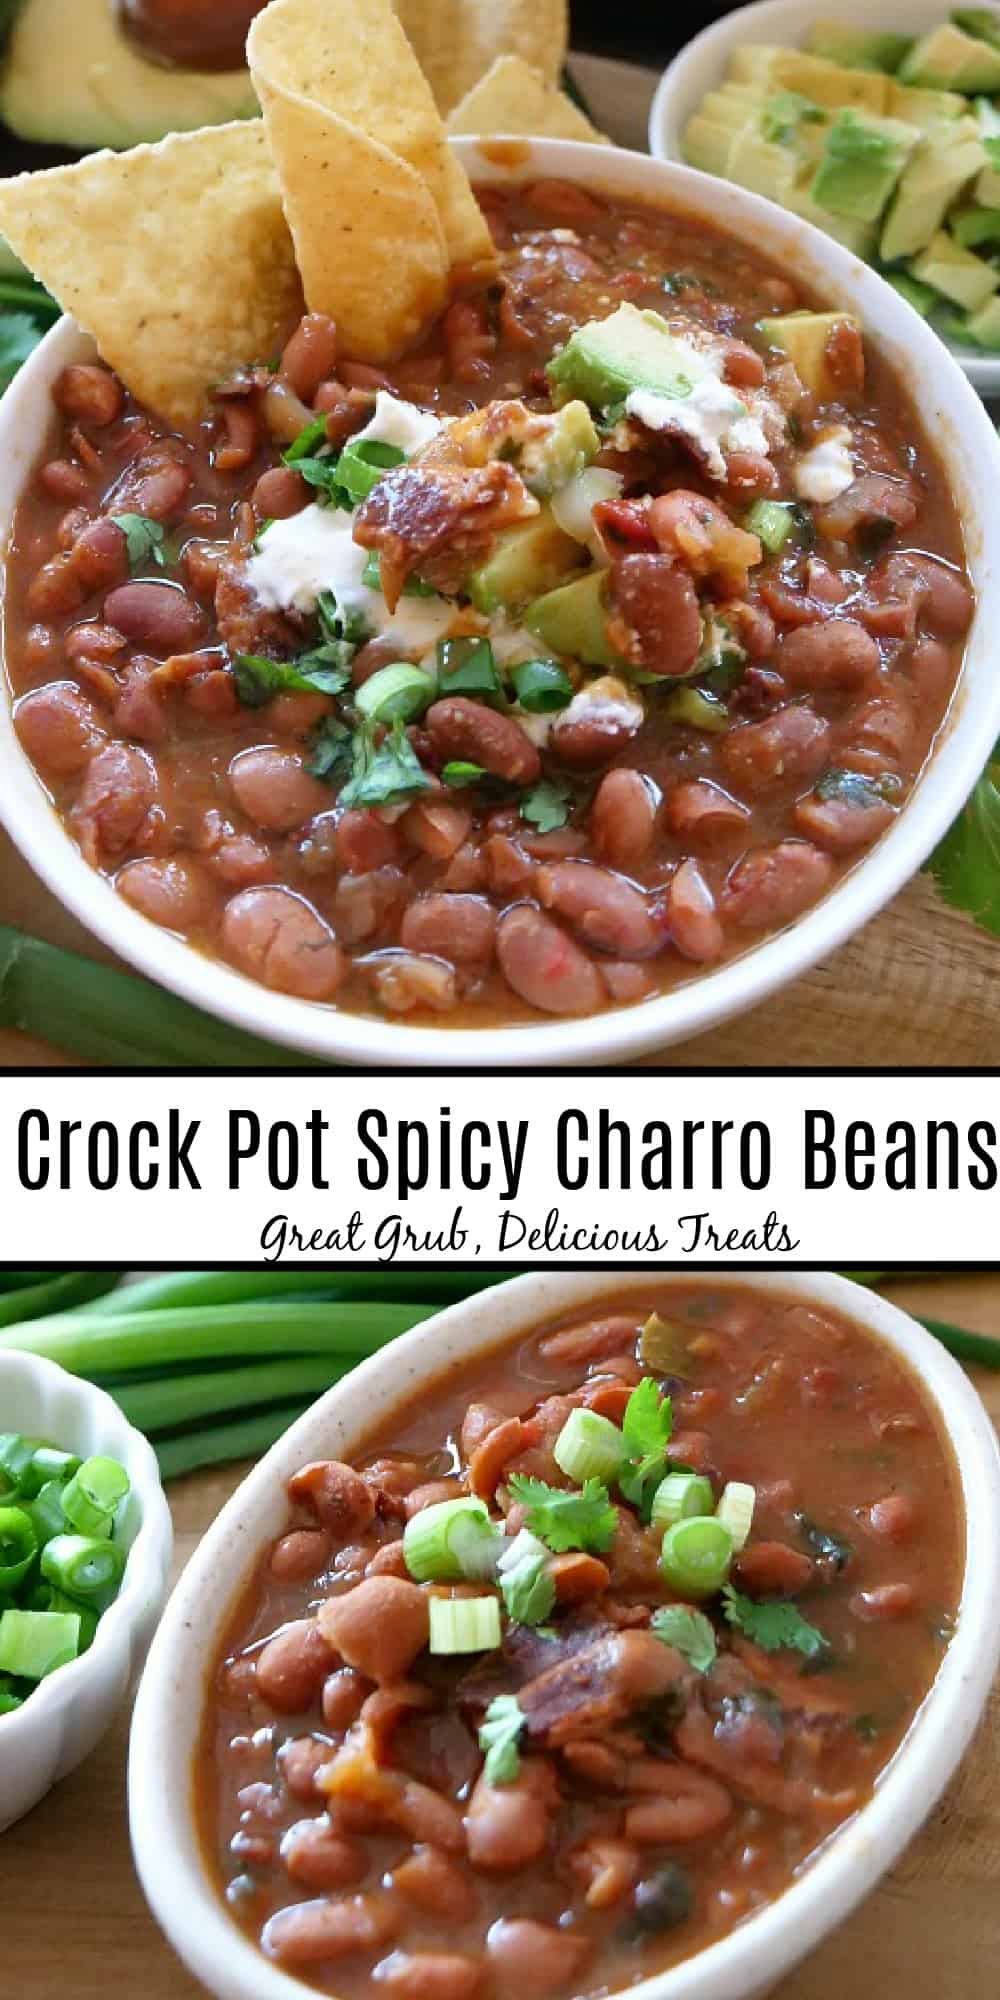 A double collage photo of charro beans.